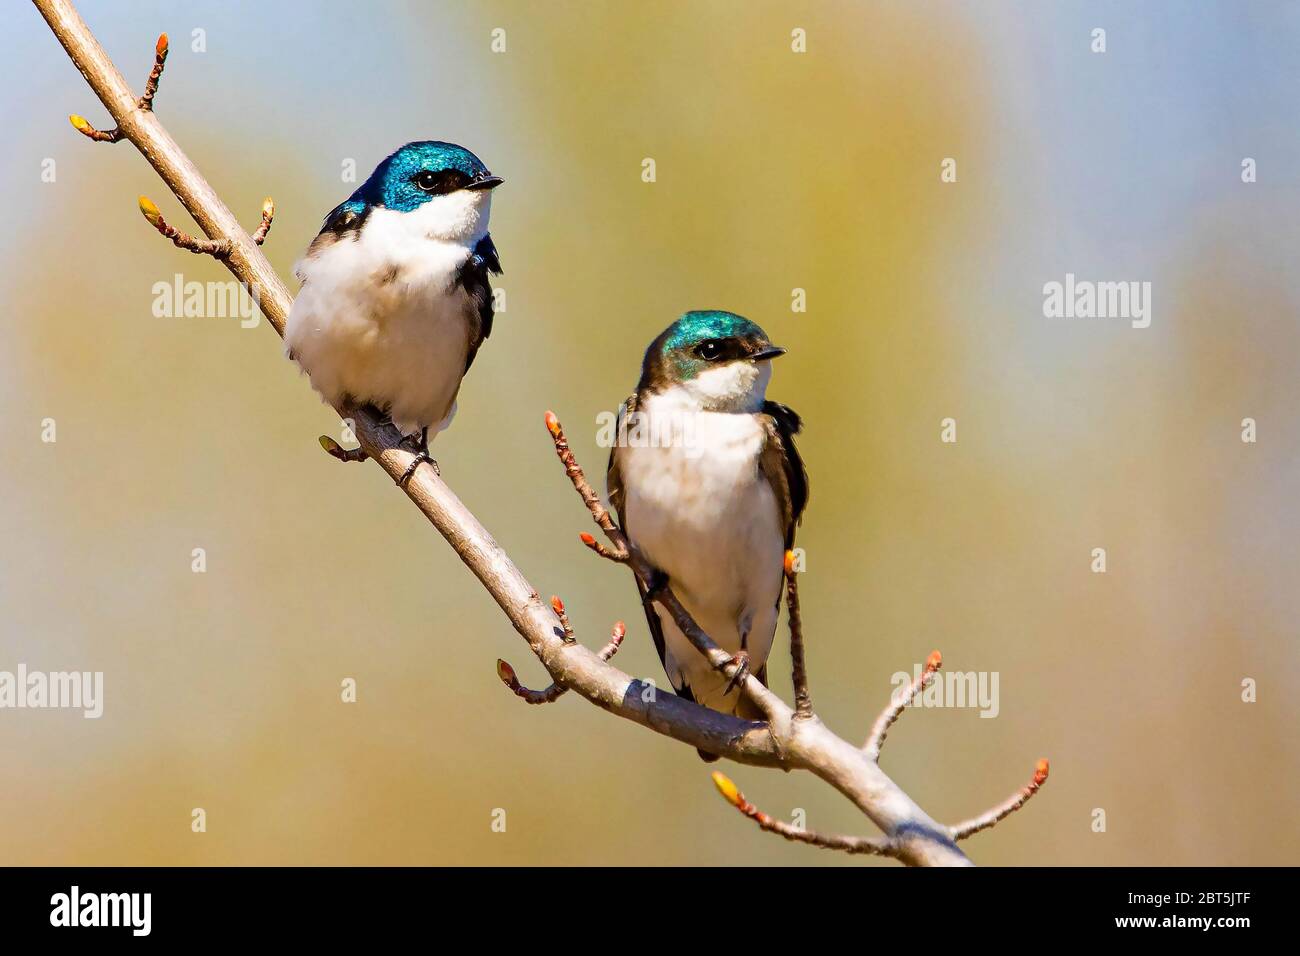 Cute tree swallow birds couple mating close up portrait in spring day ...